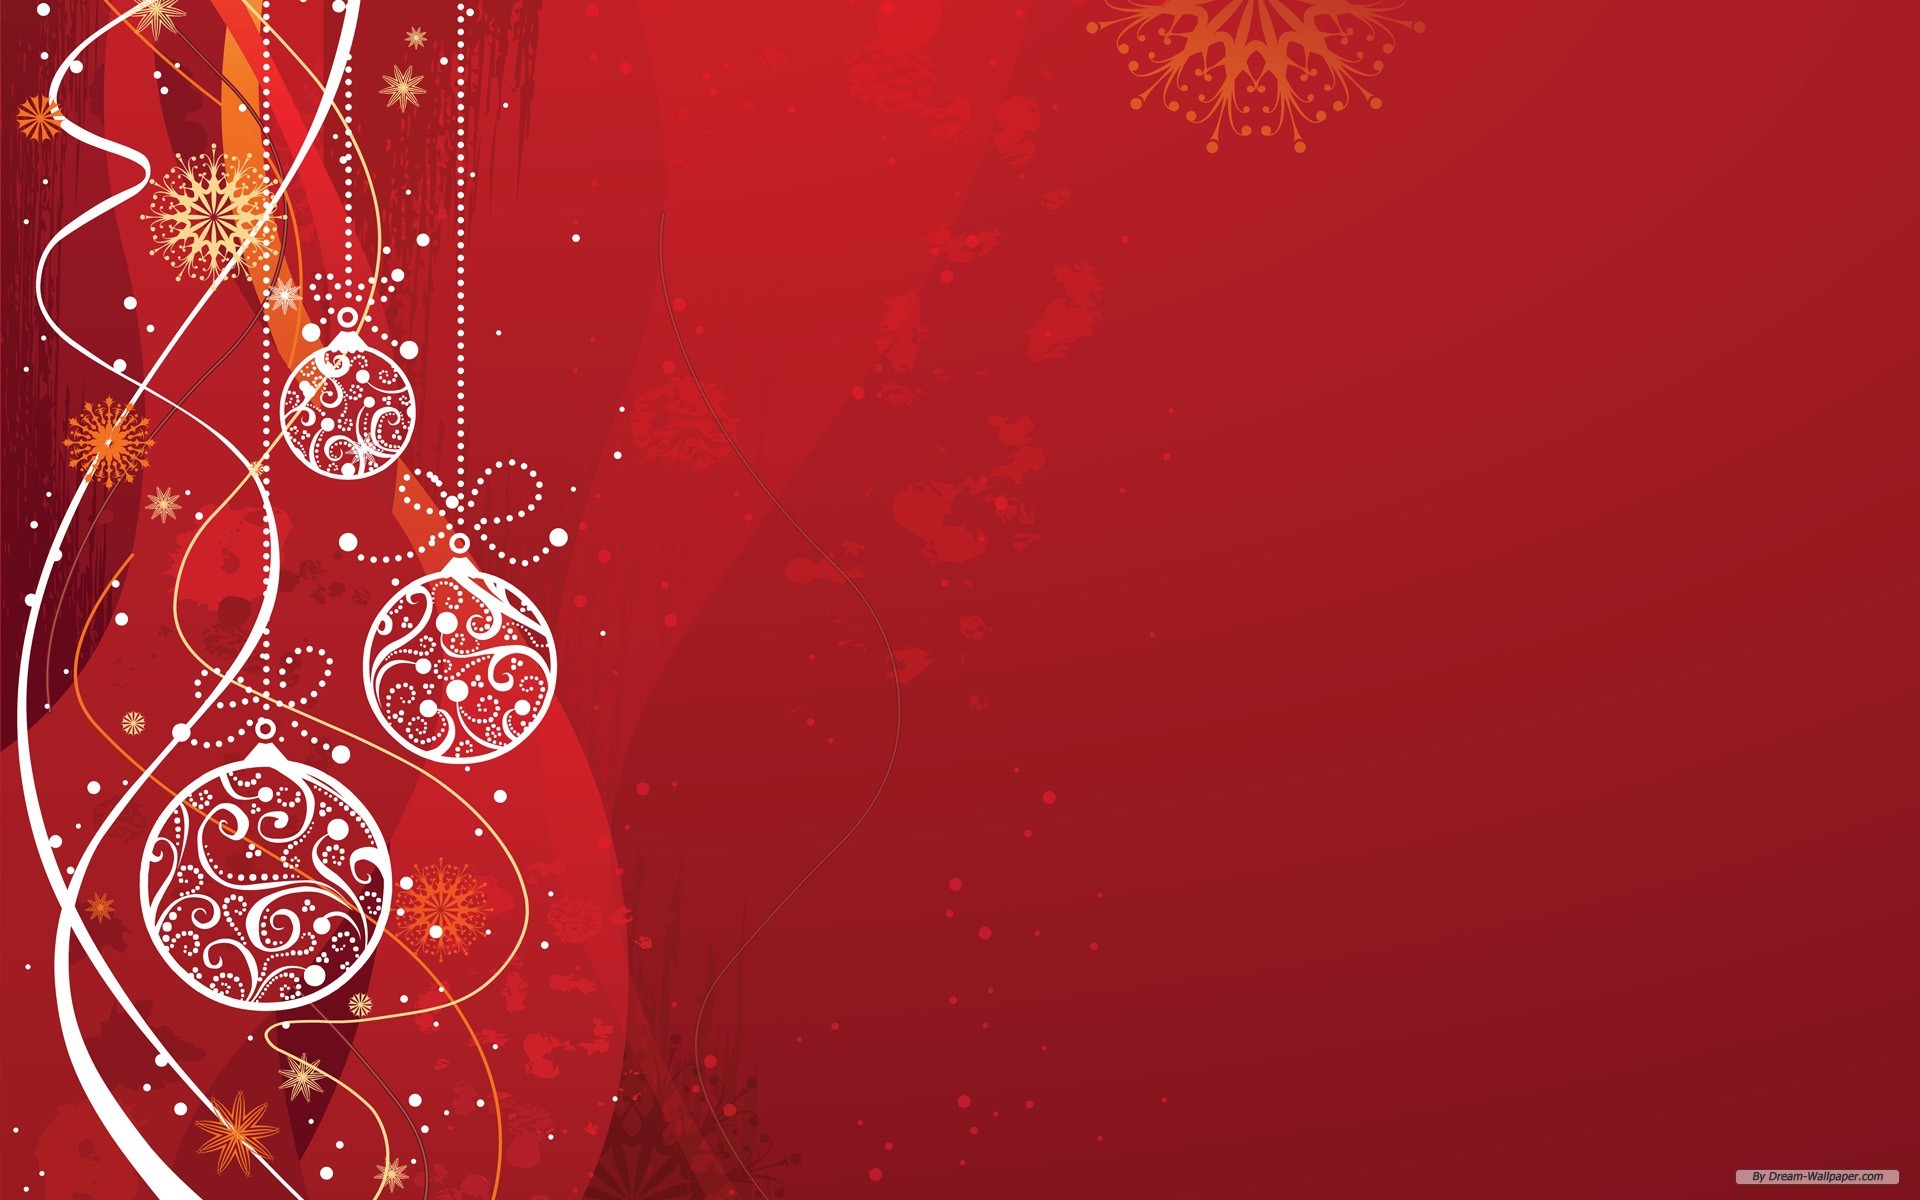 1920x1200 Over Free Holiday wallpaper - Christmas theme 8 - - 18 wallpaper in Dream  Wallpaper.